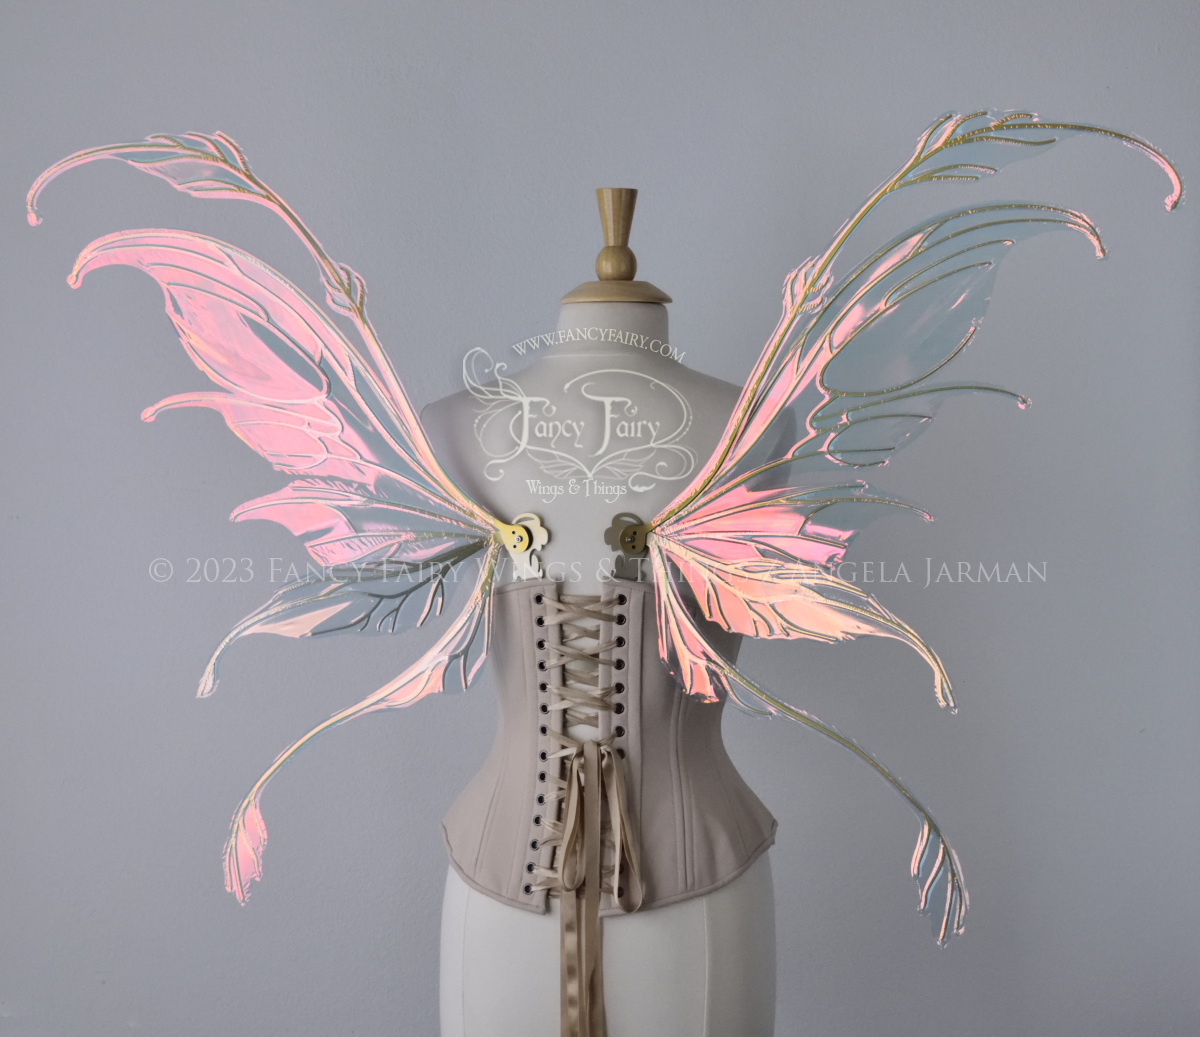 Back view of an ivory dress form wearing an underbust corset & 'Fauna' pinkish iridescent fairy wings with gold veining